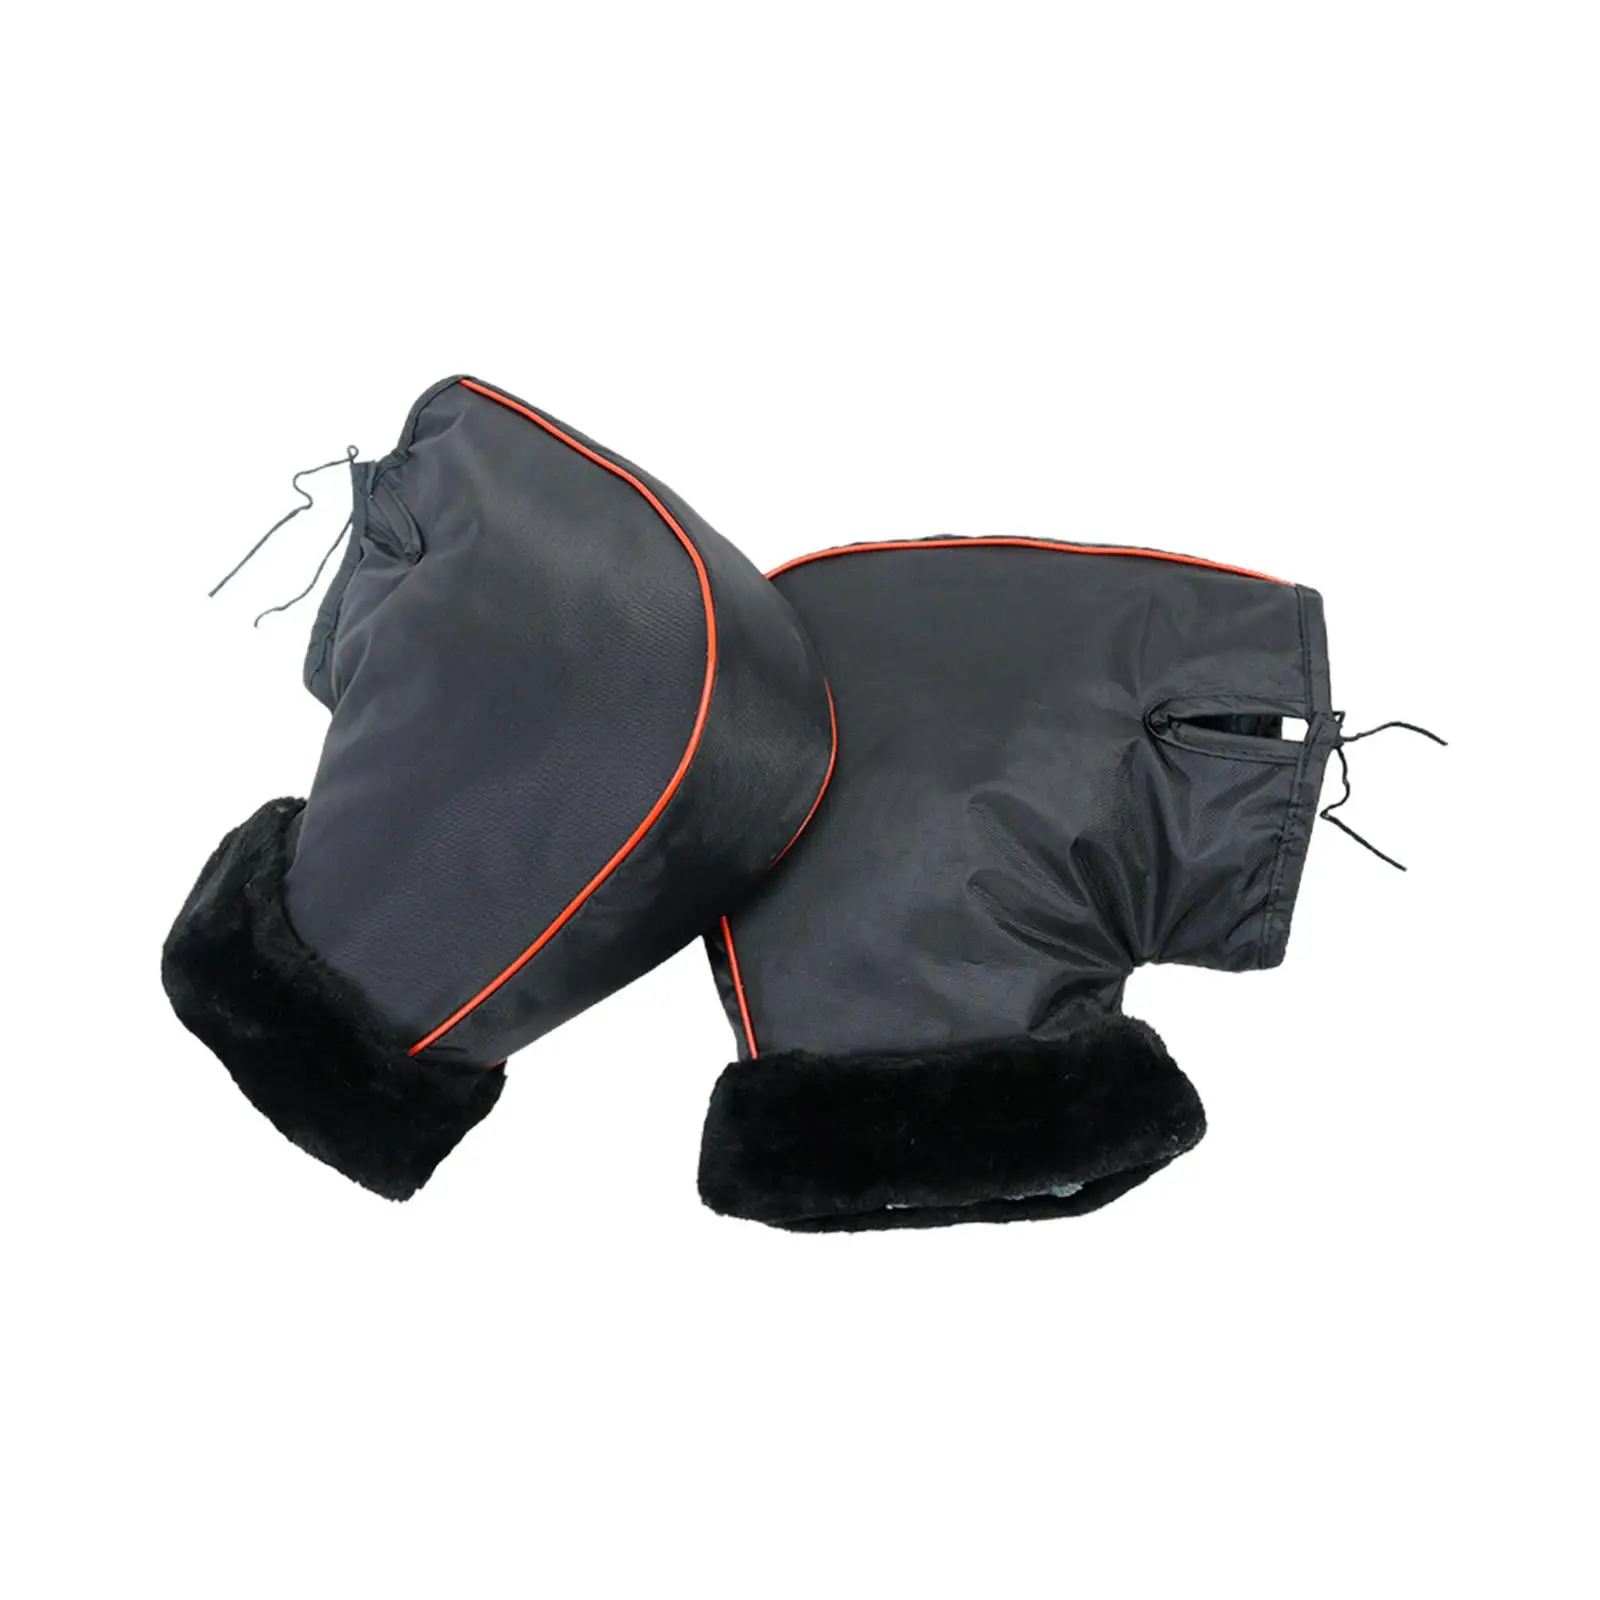 Motorcycle Handlebar Muffs Weather Protection Mittens Covers for Riding